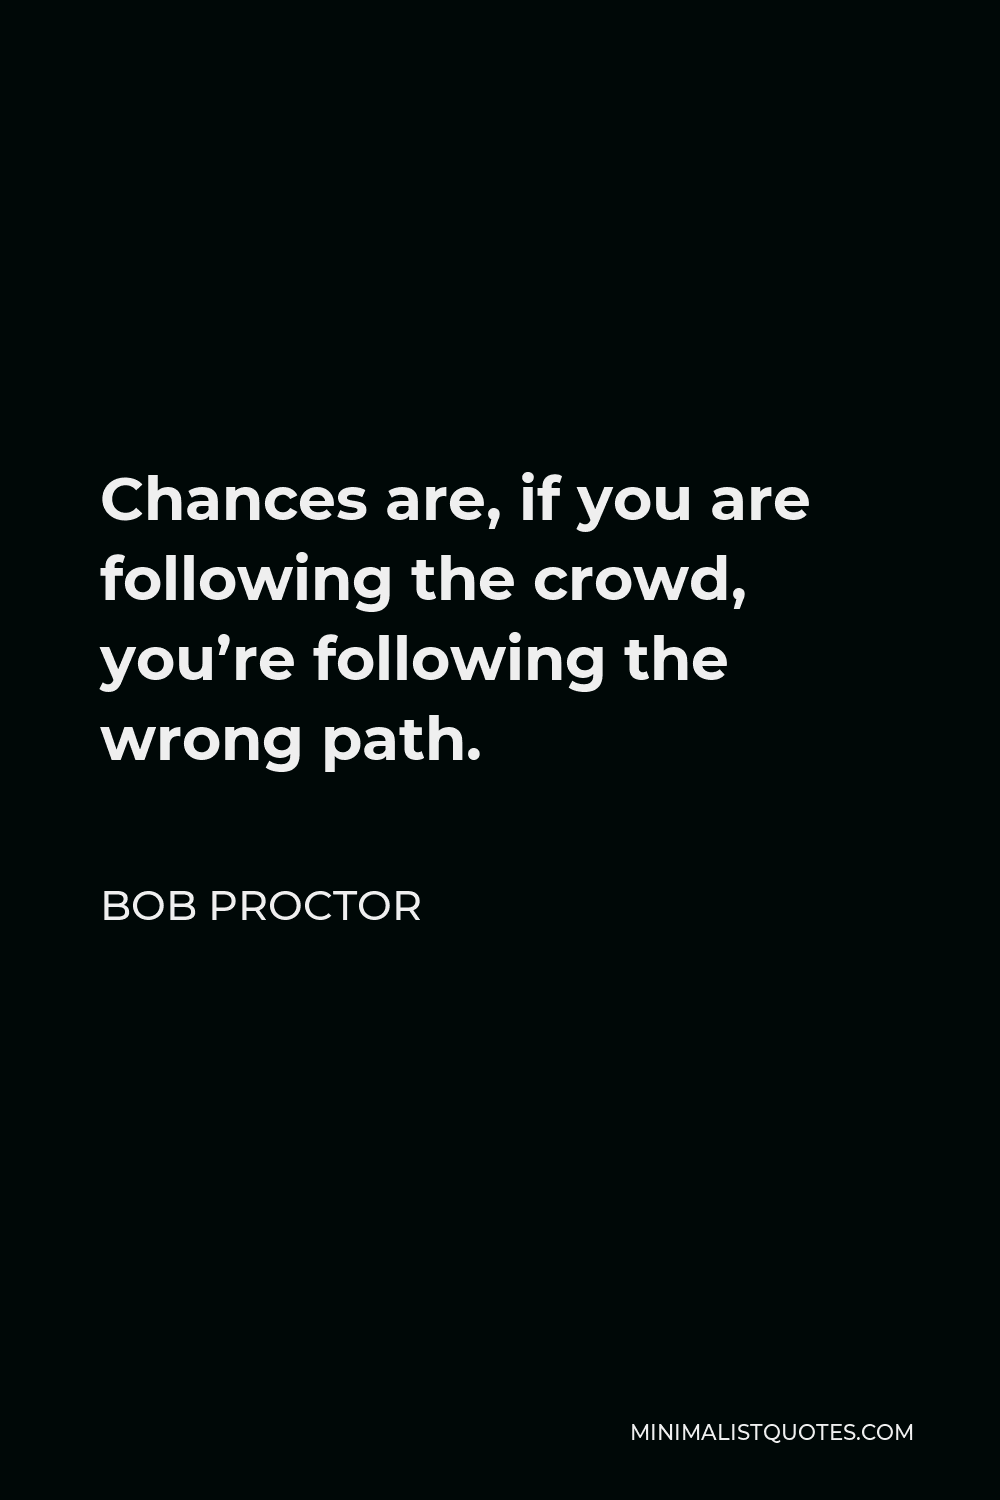 Bob Proctor Quote - Chances are, if you are following the crowd, you’re following the wrong path.